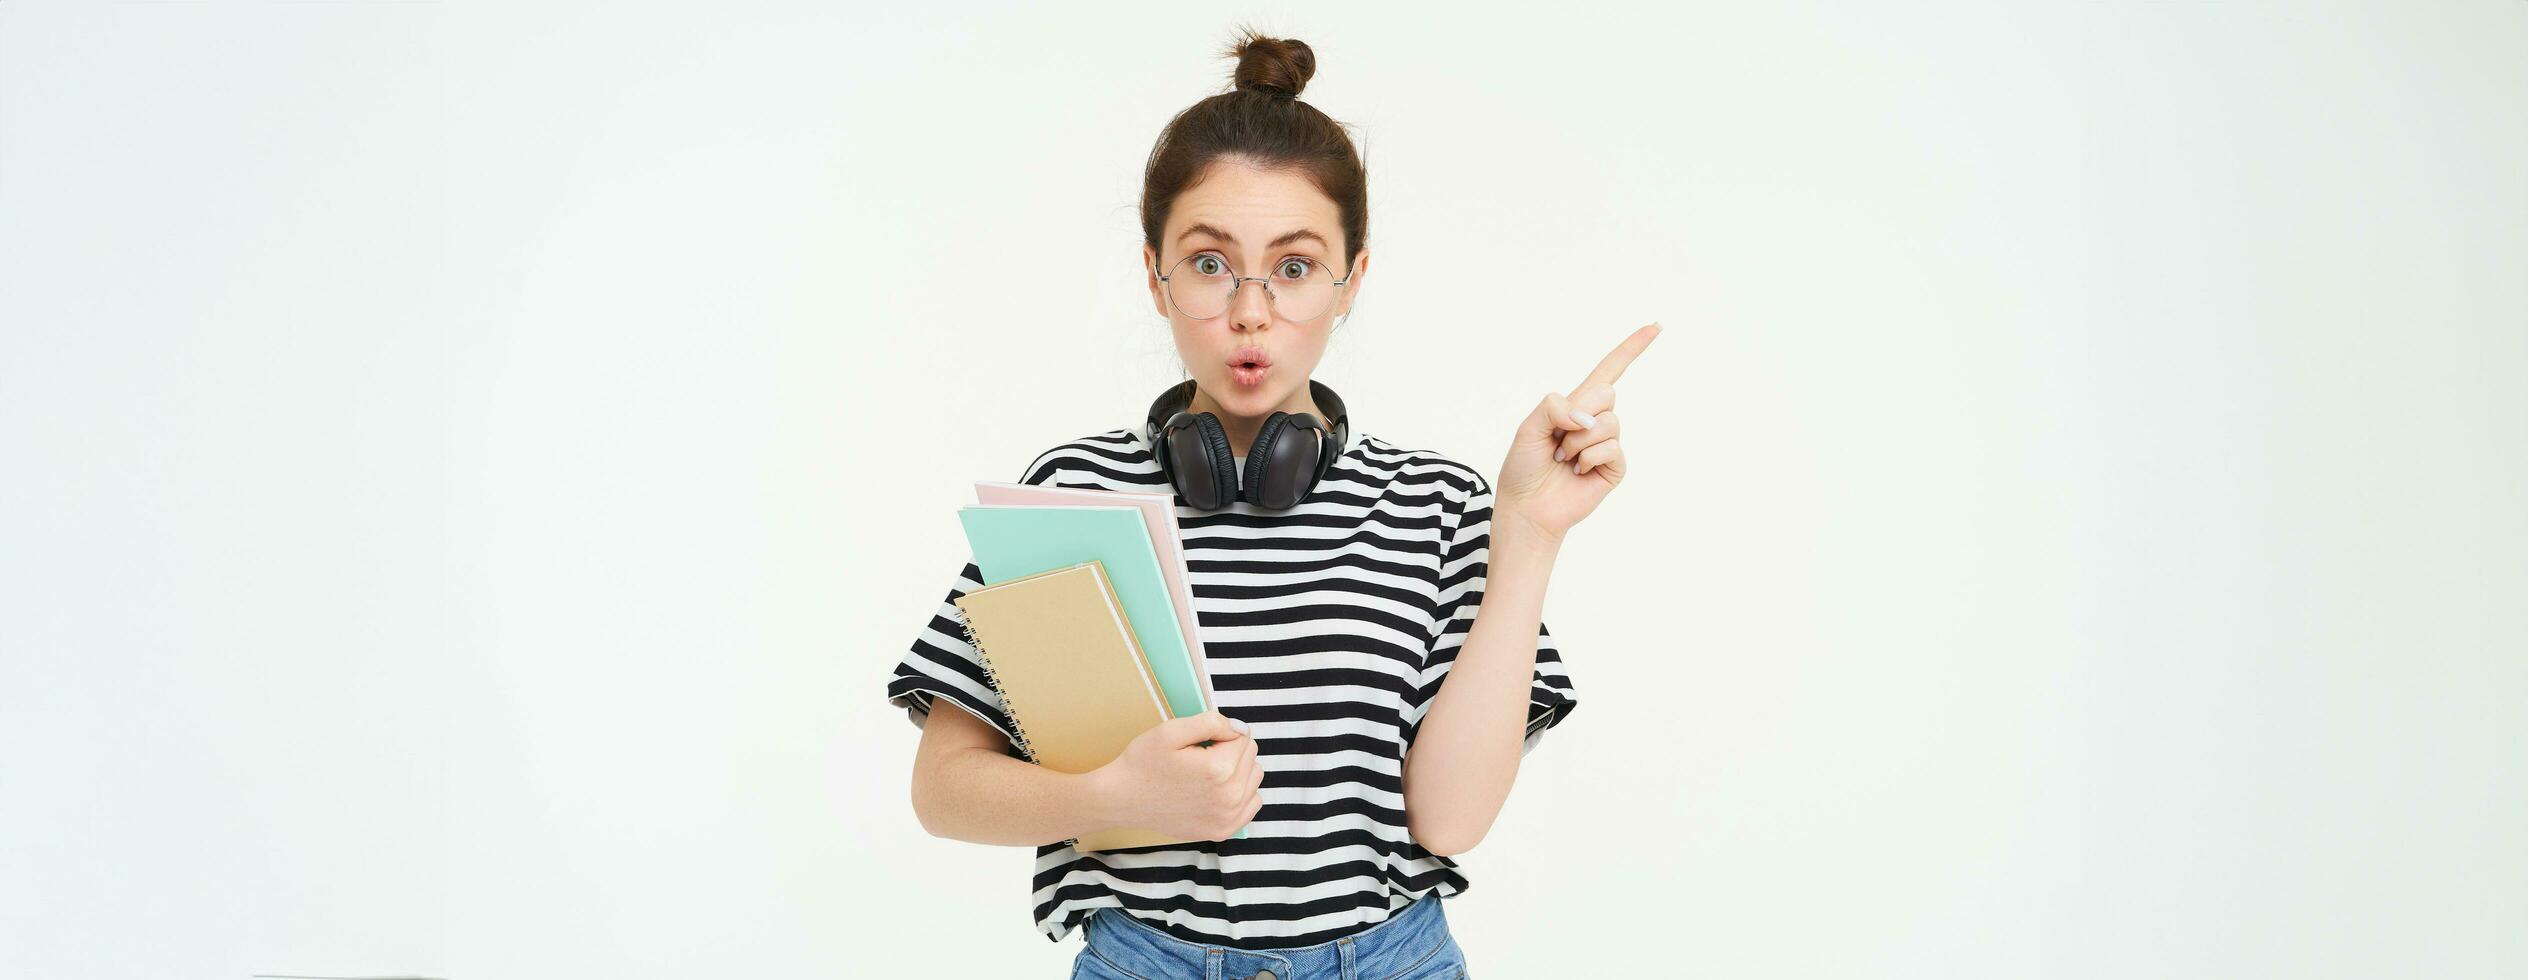 Portrait of girl with surprised face, interested in advertisement on the left, pointing at banner with curious face, wearing glasses, holding documents and notebooks in hand, white background photo